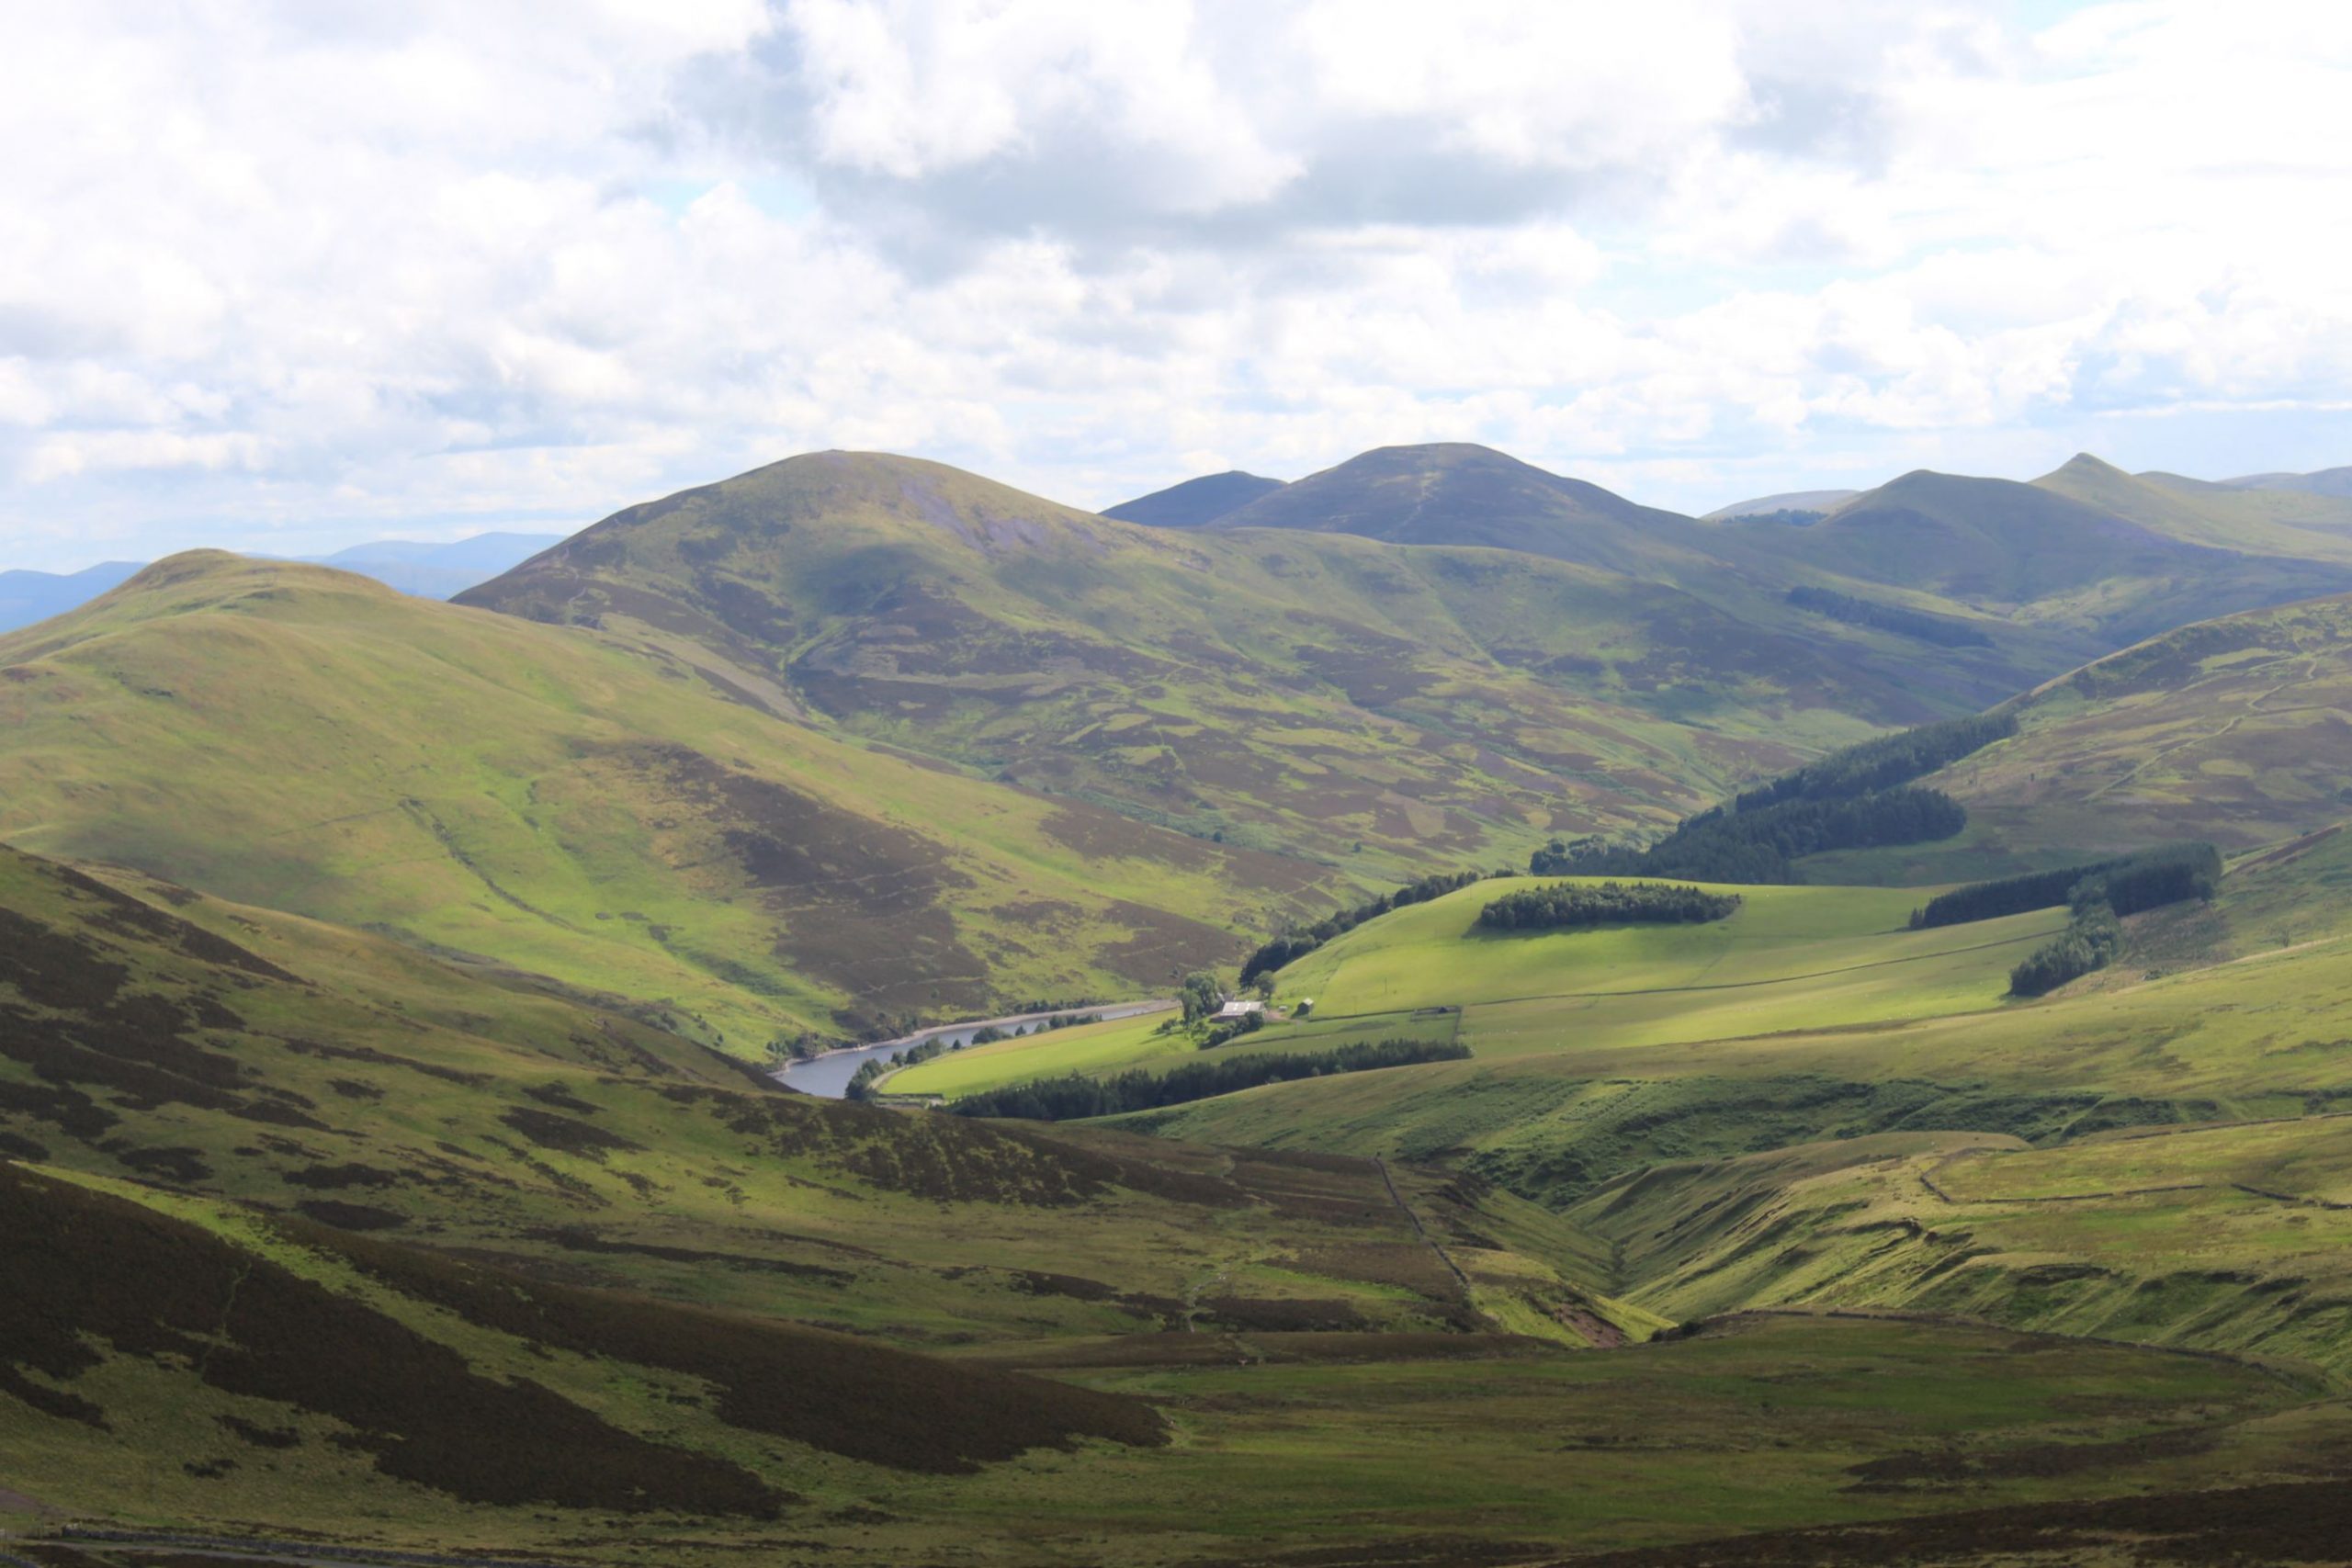 The view out over the Pentland Hills from the top of Allermuir, in Edinburgh